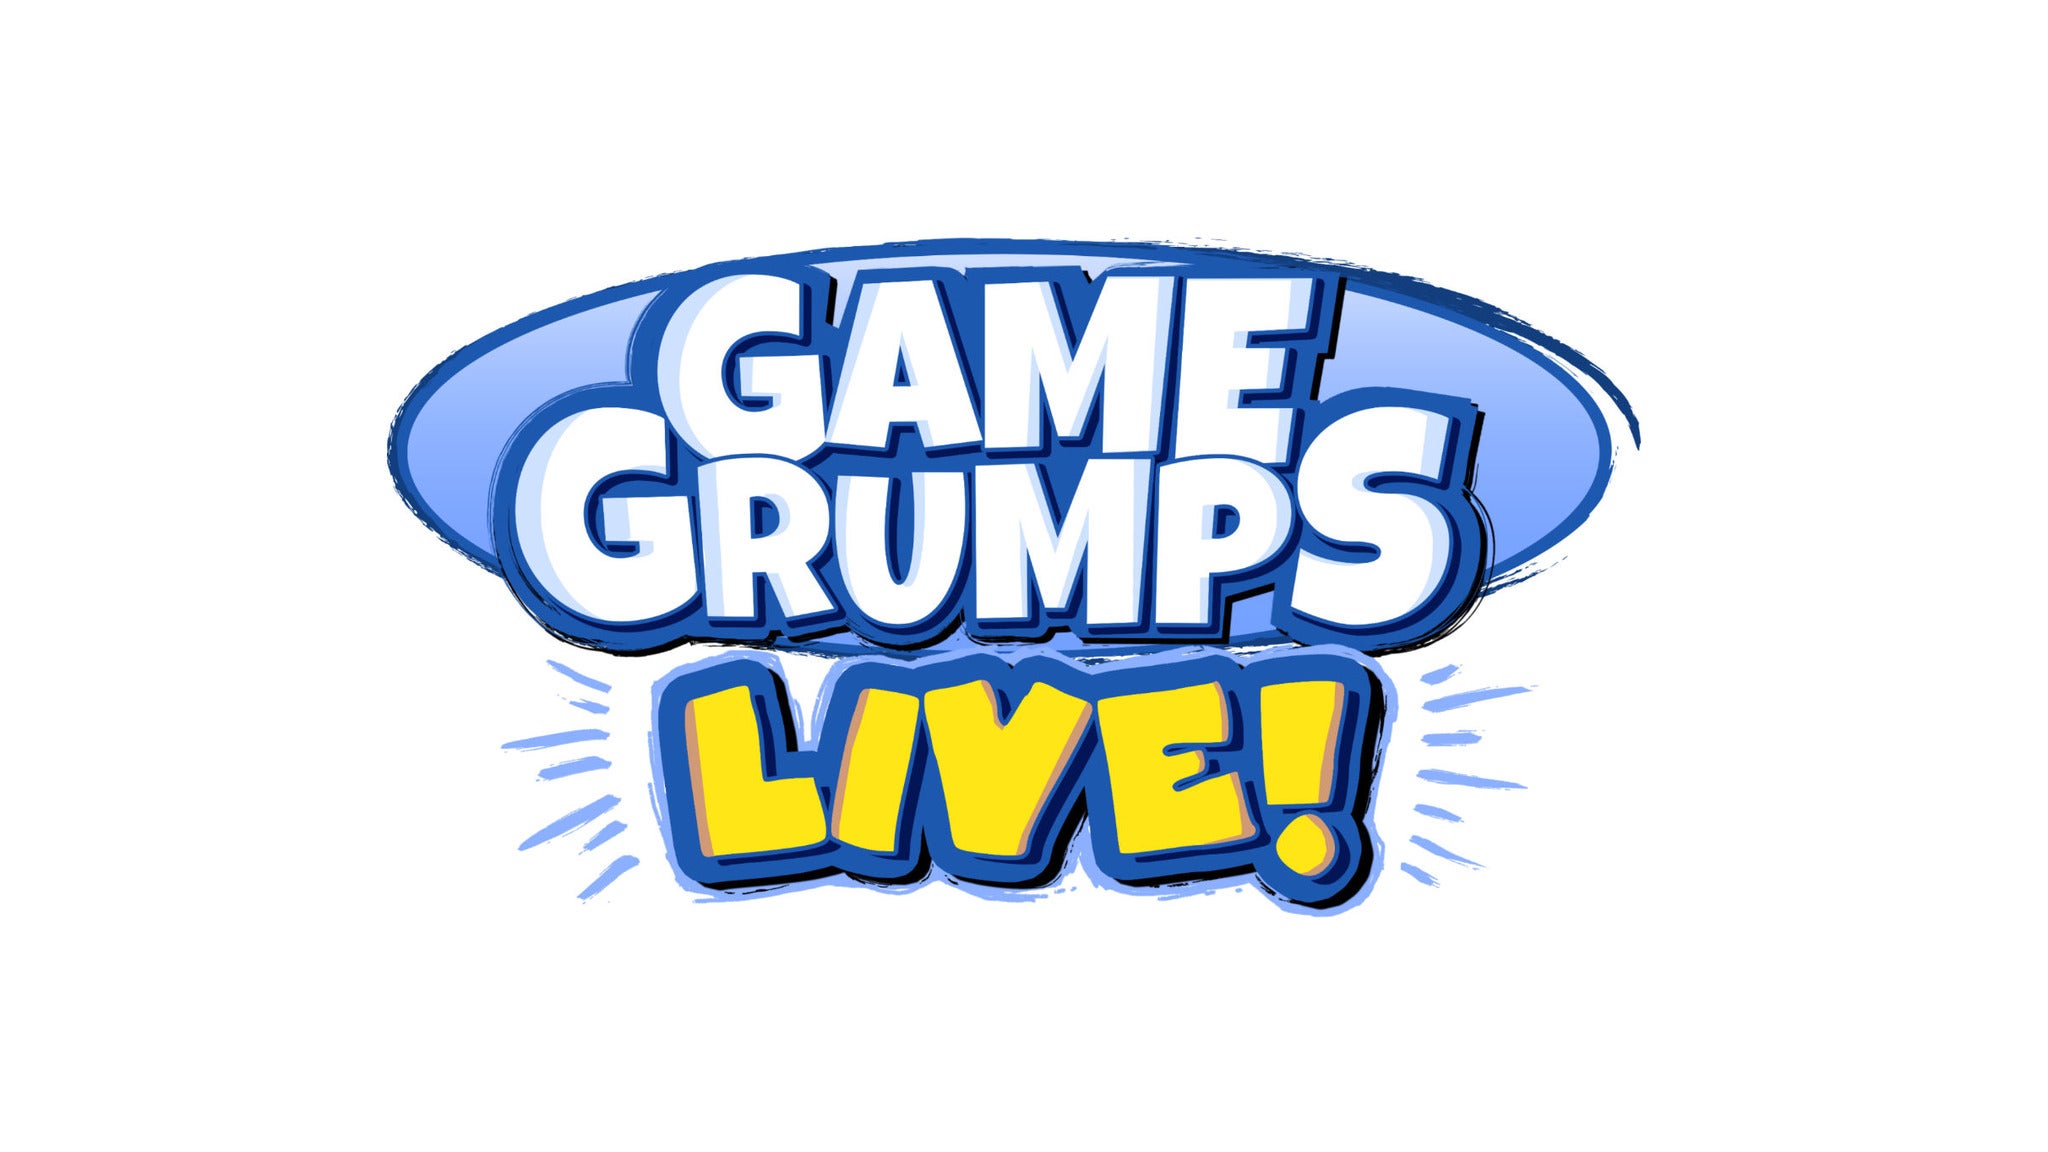 Image used with permission from Ticketmaster | Game Grumps Live - Tournament Of Gamers tickets